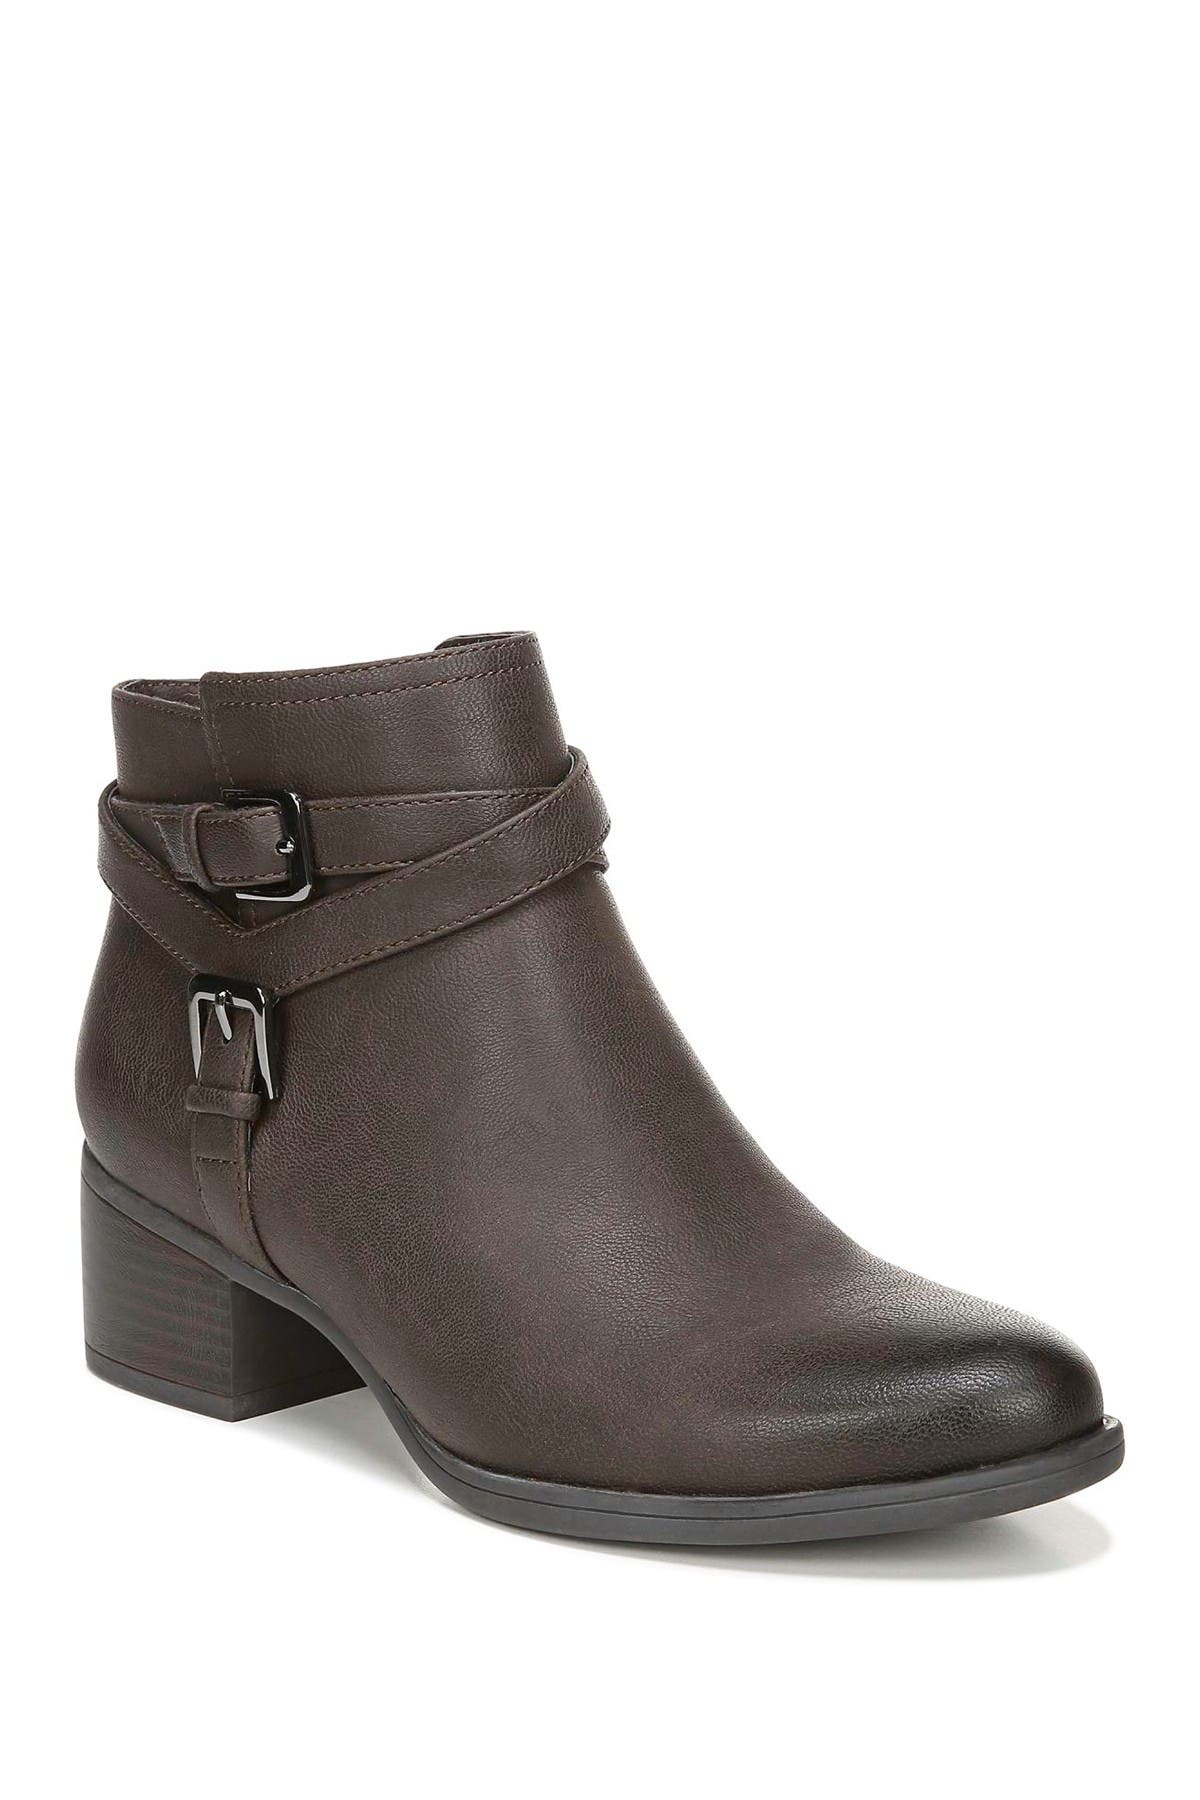 naturalizer ankle boots wide width